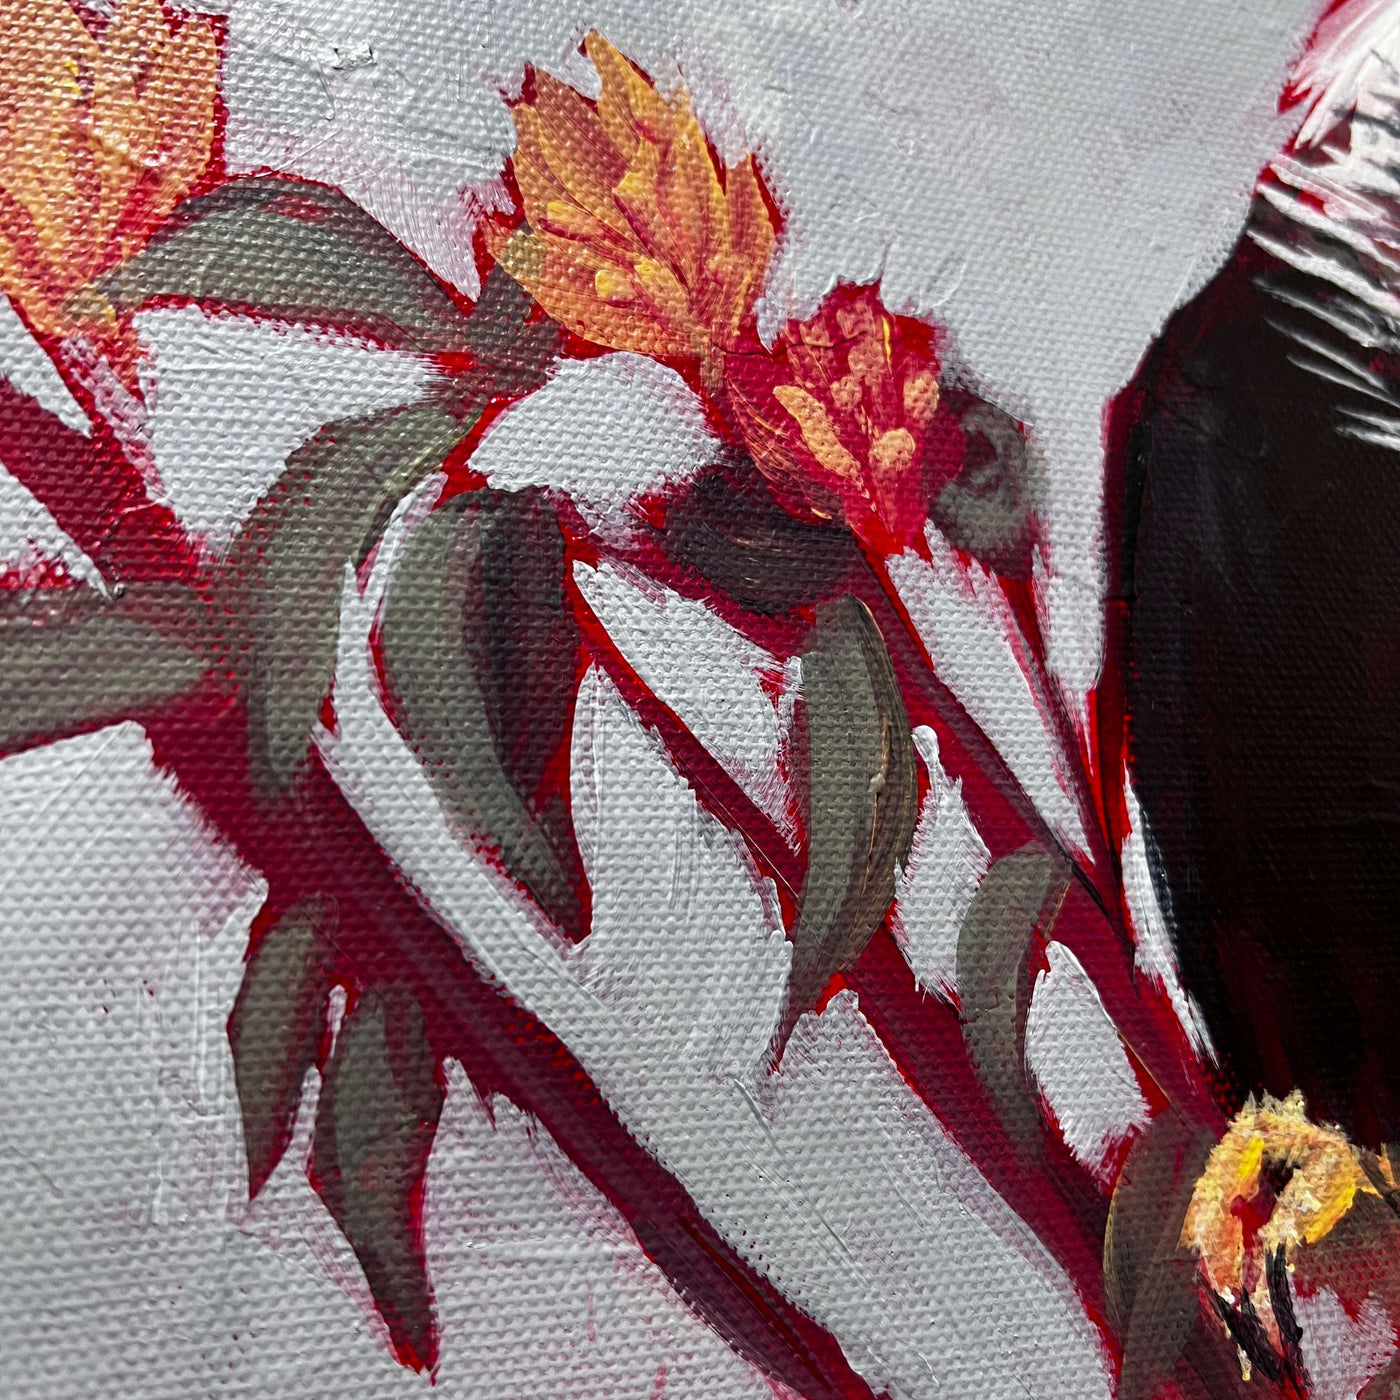 Texture-focused close-up of painted flowers in a caracara bird painting.